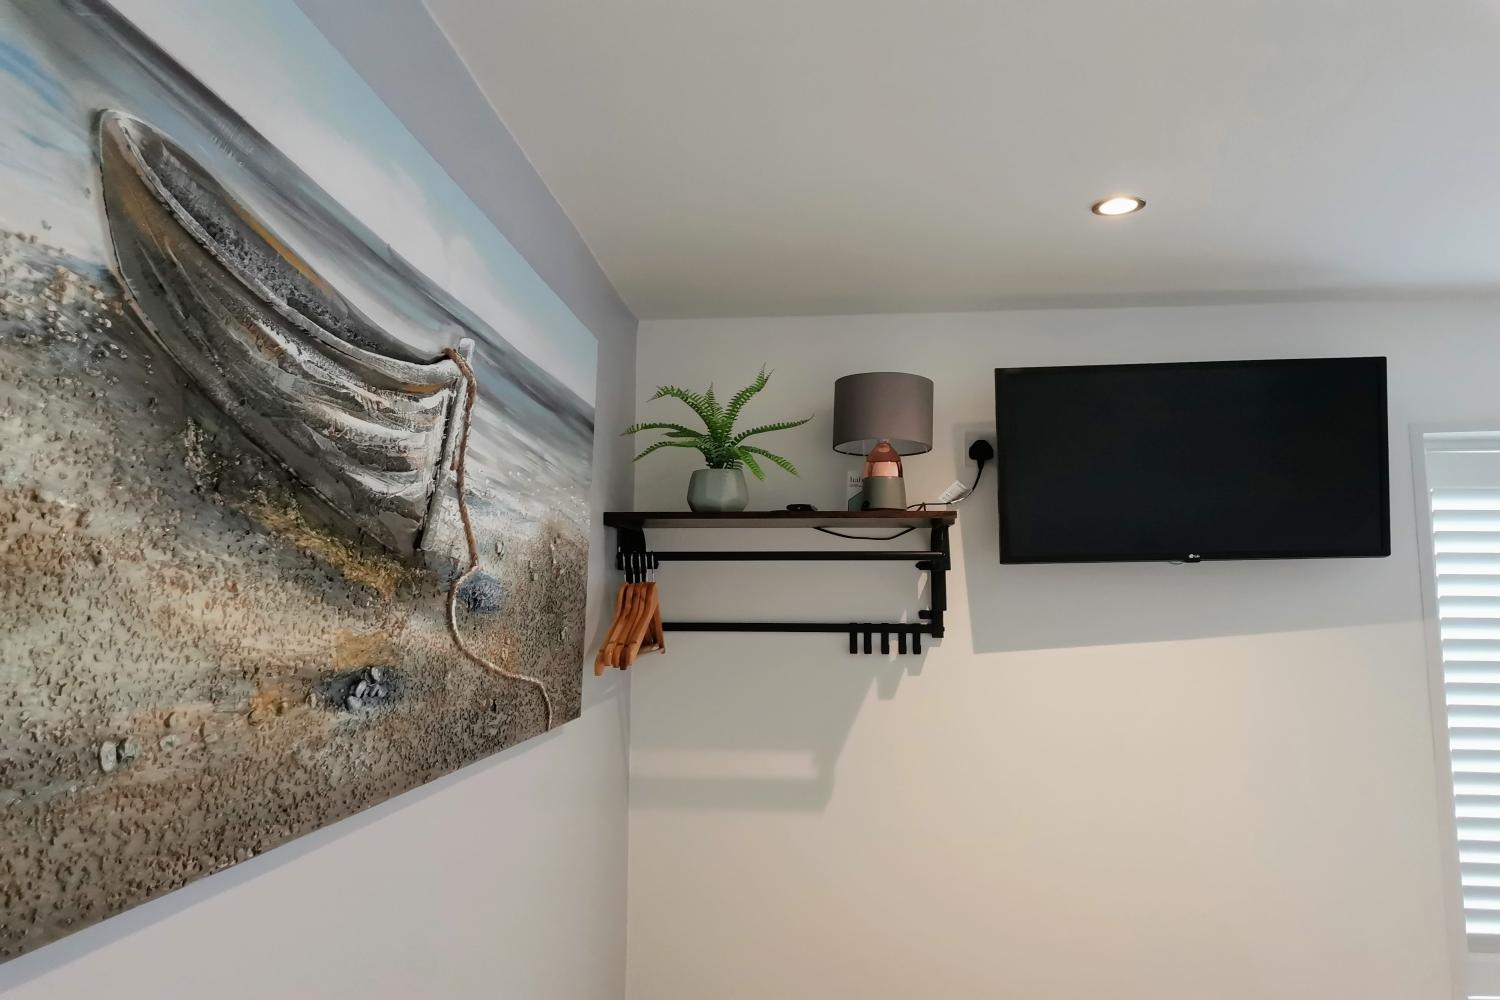 Smart TV, lamp, clothes hanging area